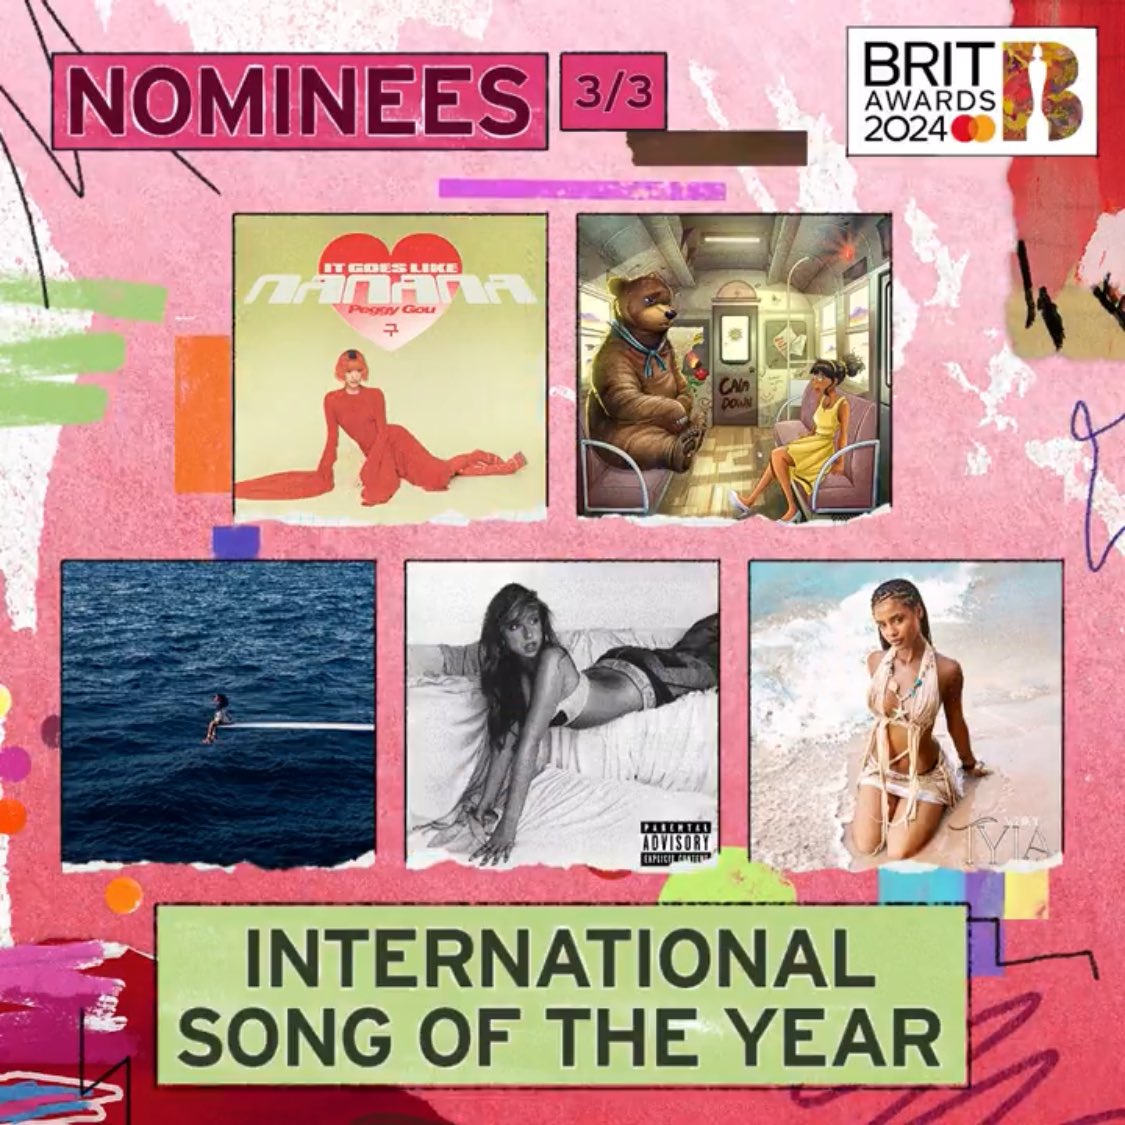 🏆Indicados a International Song of the Year no #BRITs 2024

• @billieeilish - 'What Was I Made For'
• @davidkushner_ - 'Daylight'
• @DojaCat - 'Paint The Town Red'
• Jazzy - 'Giving Me'
• @iamlibianca - 'People'
• @Meghan_Trainor - 'Made You Look'
• @MileyCyrus -